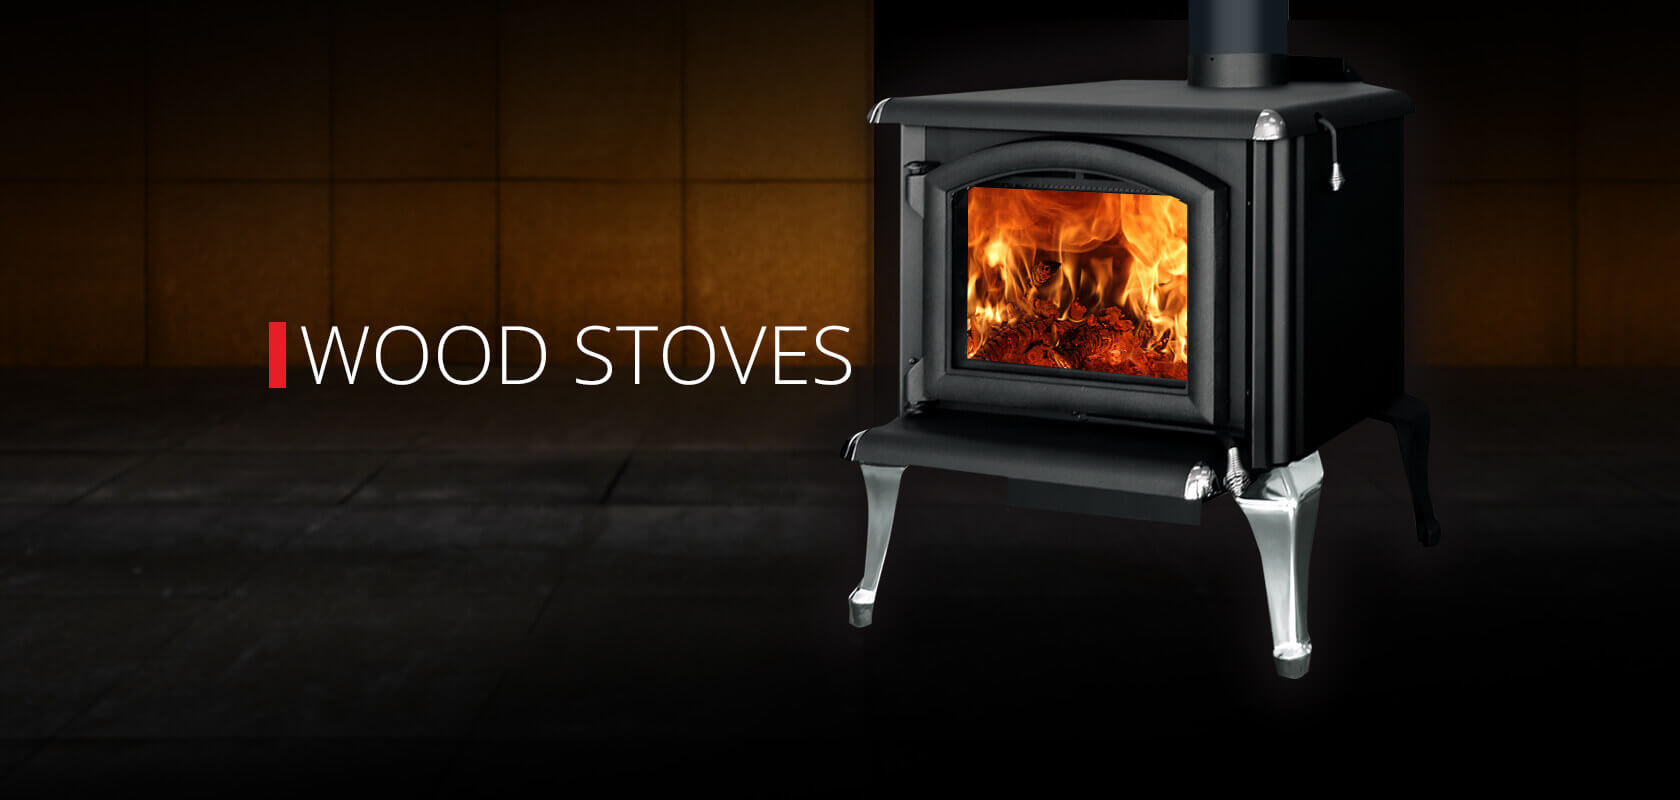 Wood Stove - J. A. ROBY Inc